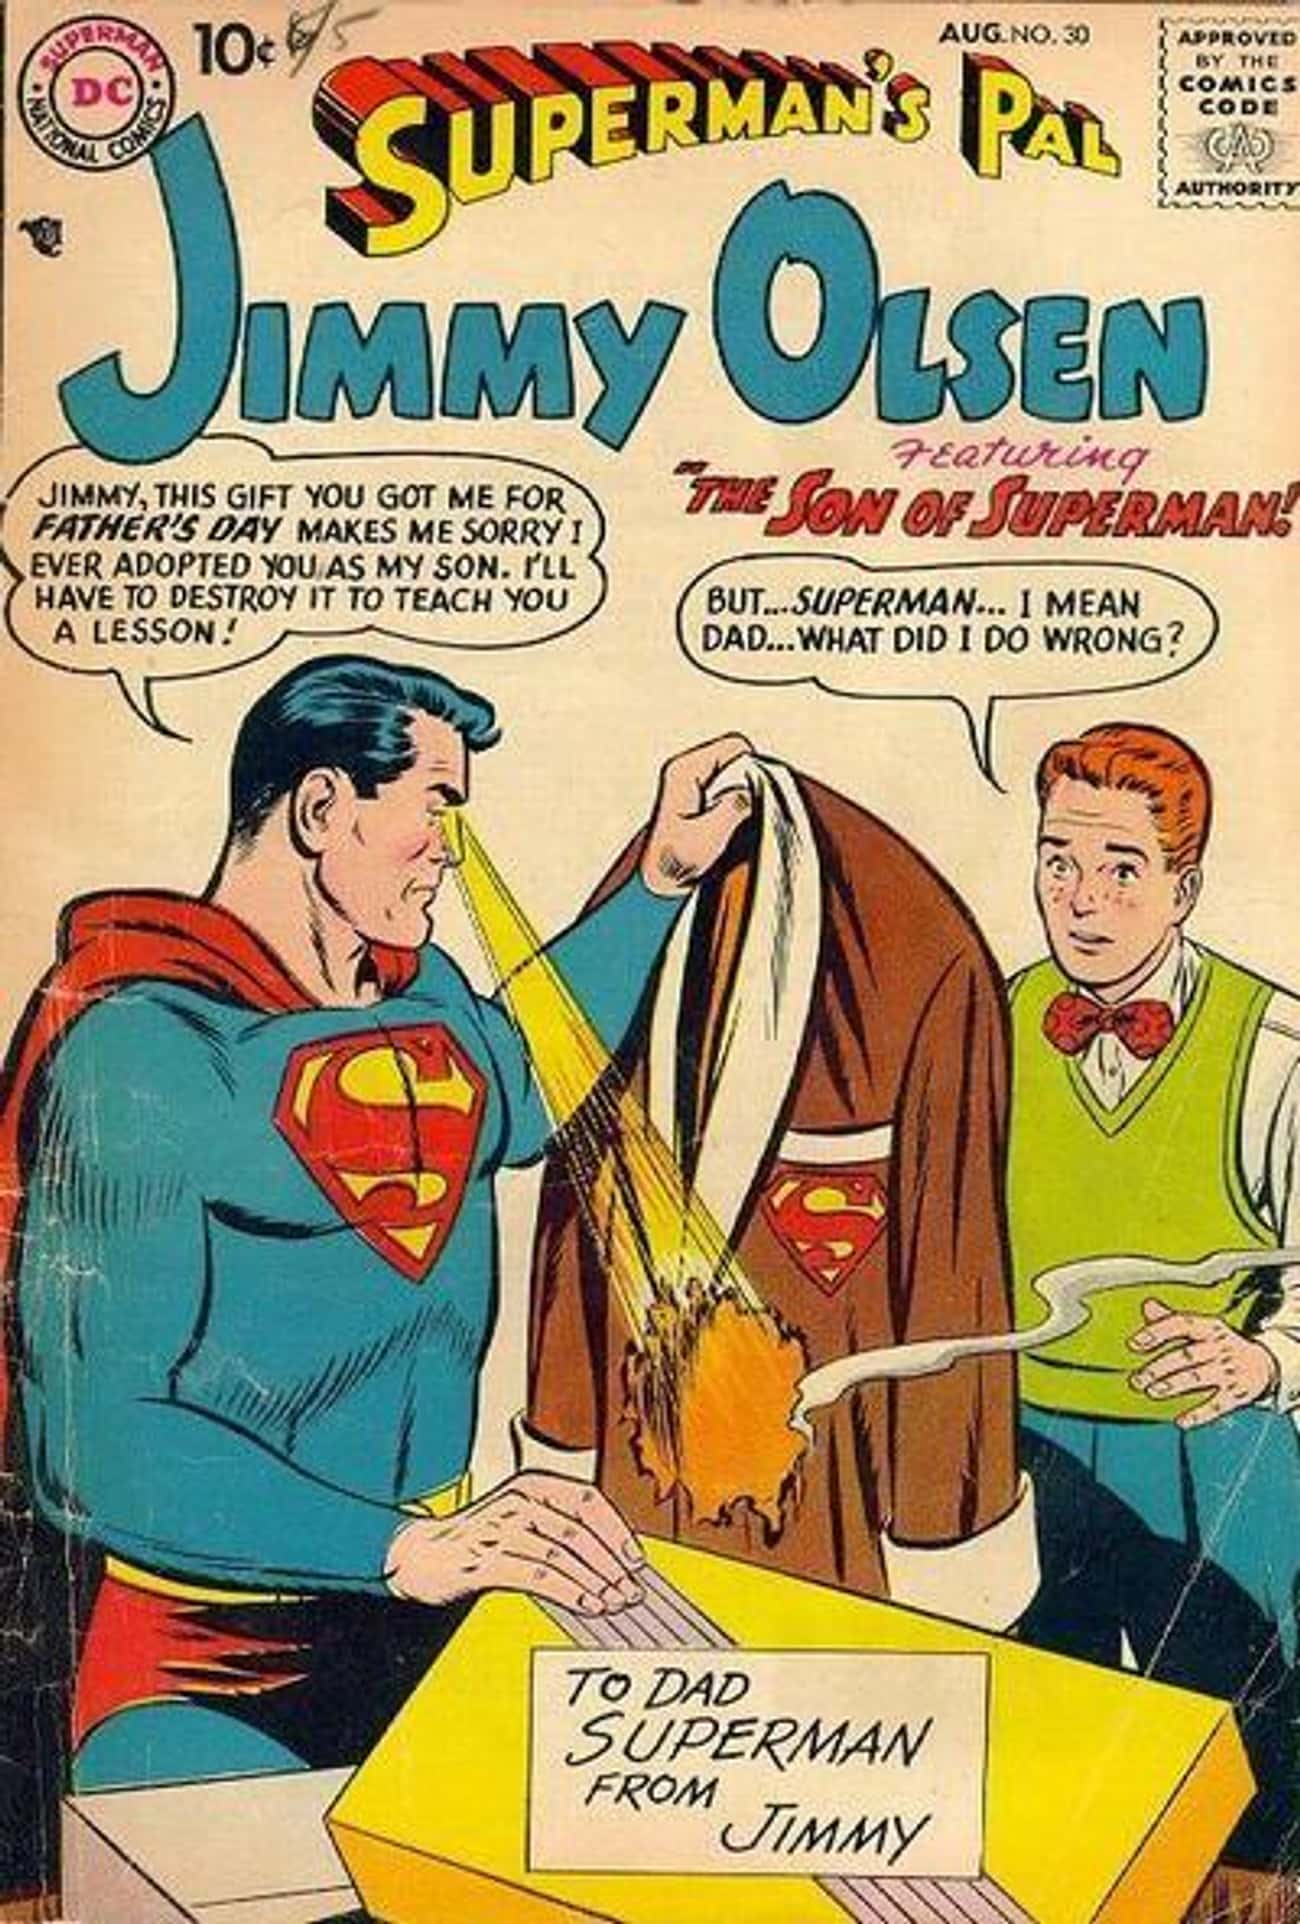 Superman Adopts And Then Mistreats Jimmy Olsen In 'Superman’s Pal, Jimmy Olsen' #30